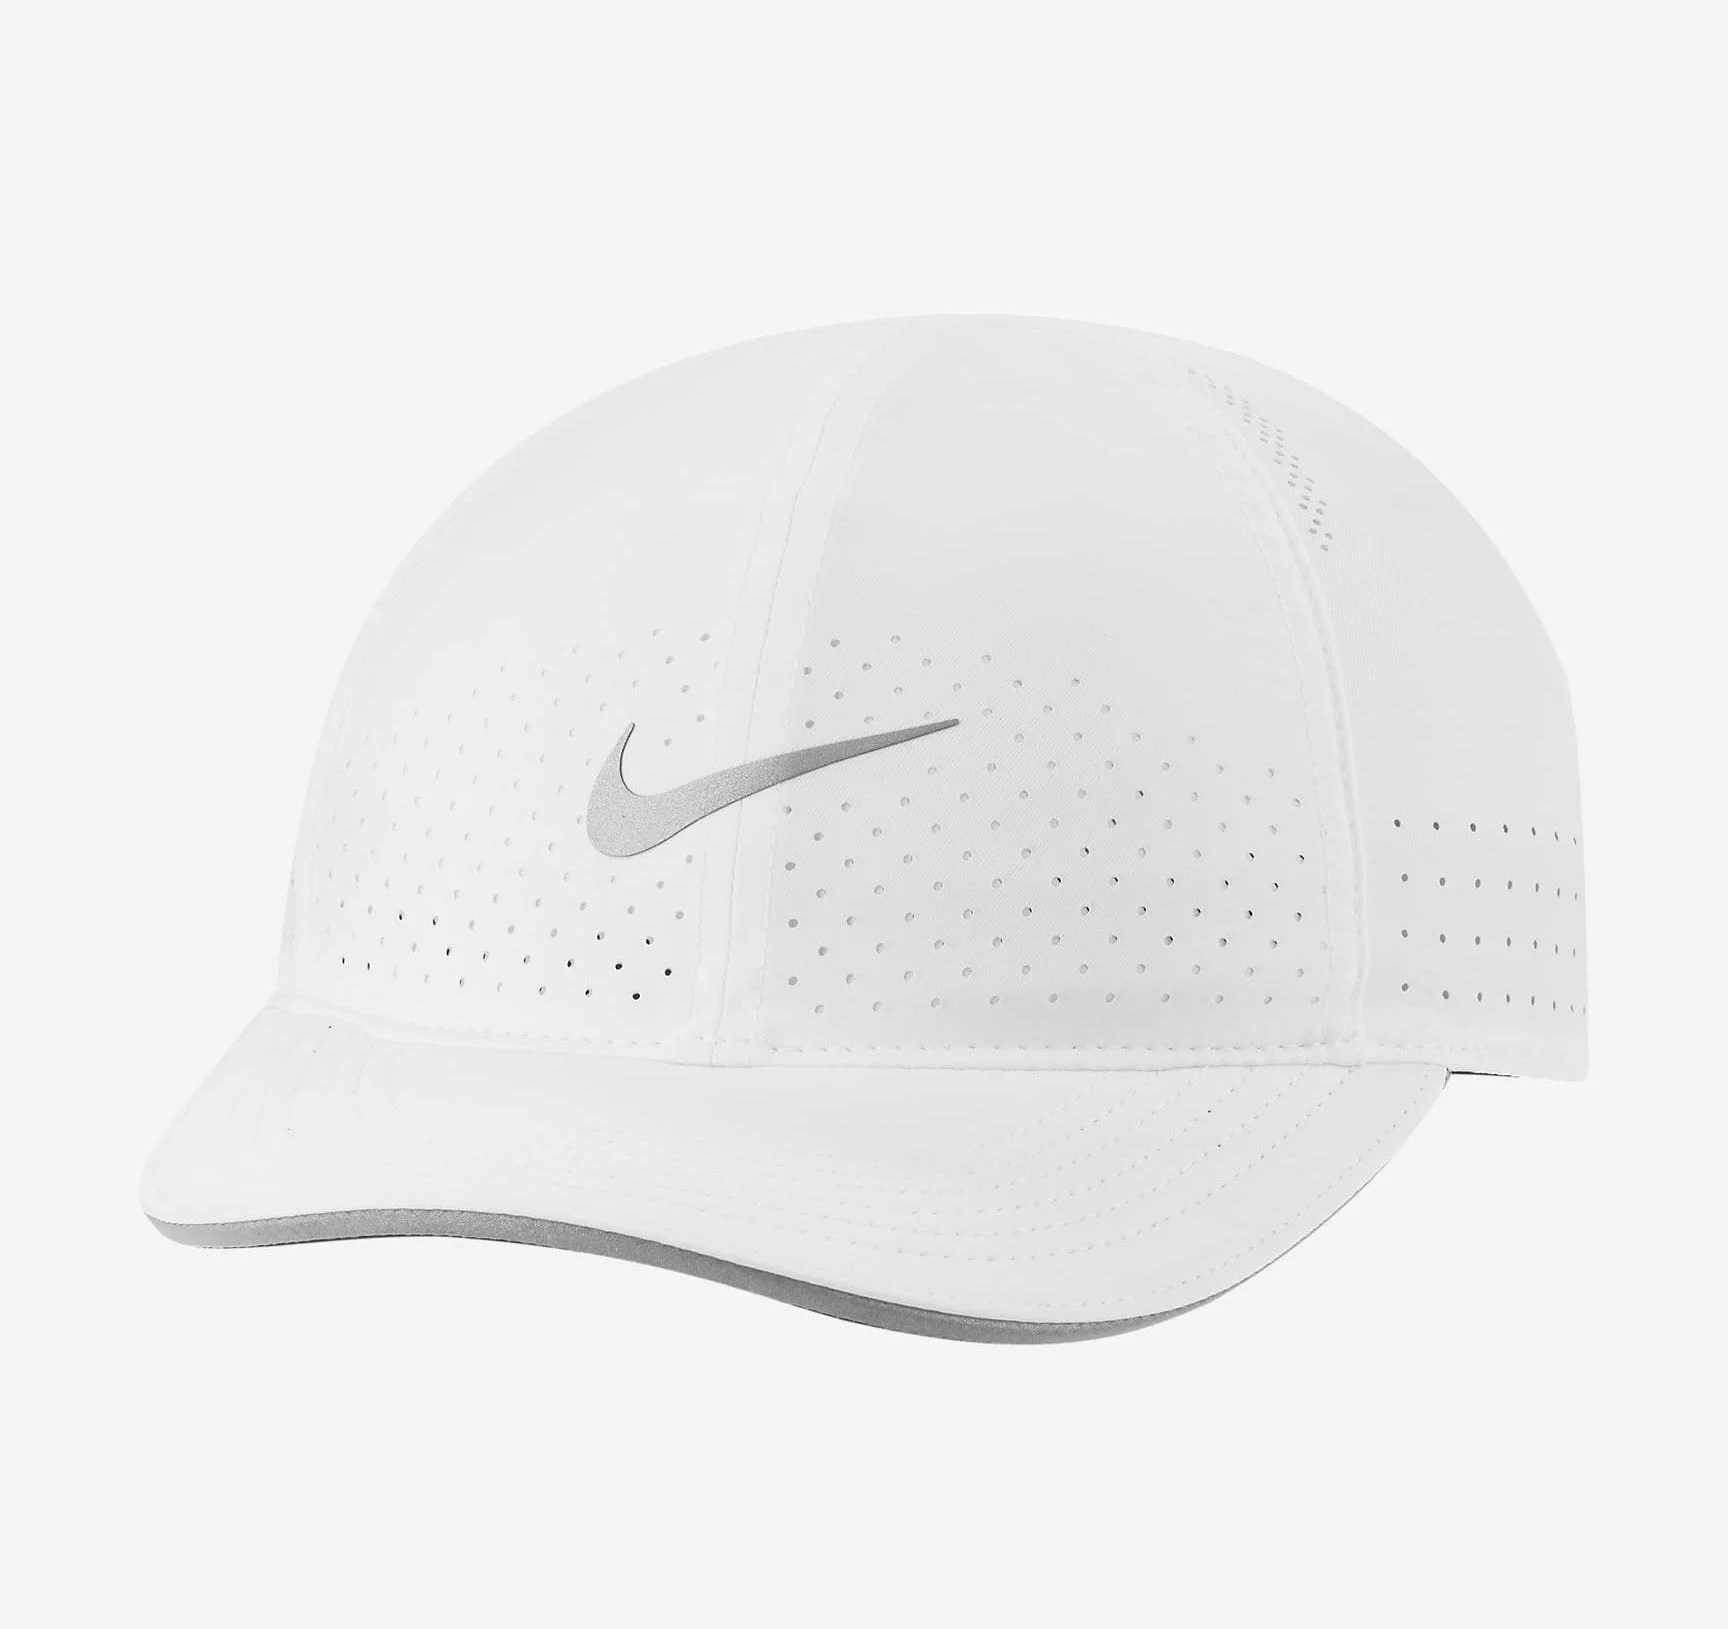 10 Best Running Hats & Caps That Protect You From UVs 2022 | Well+Good